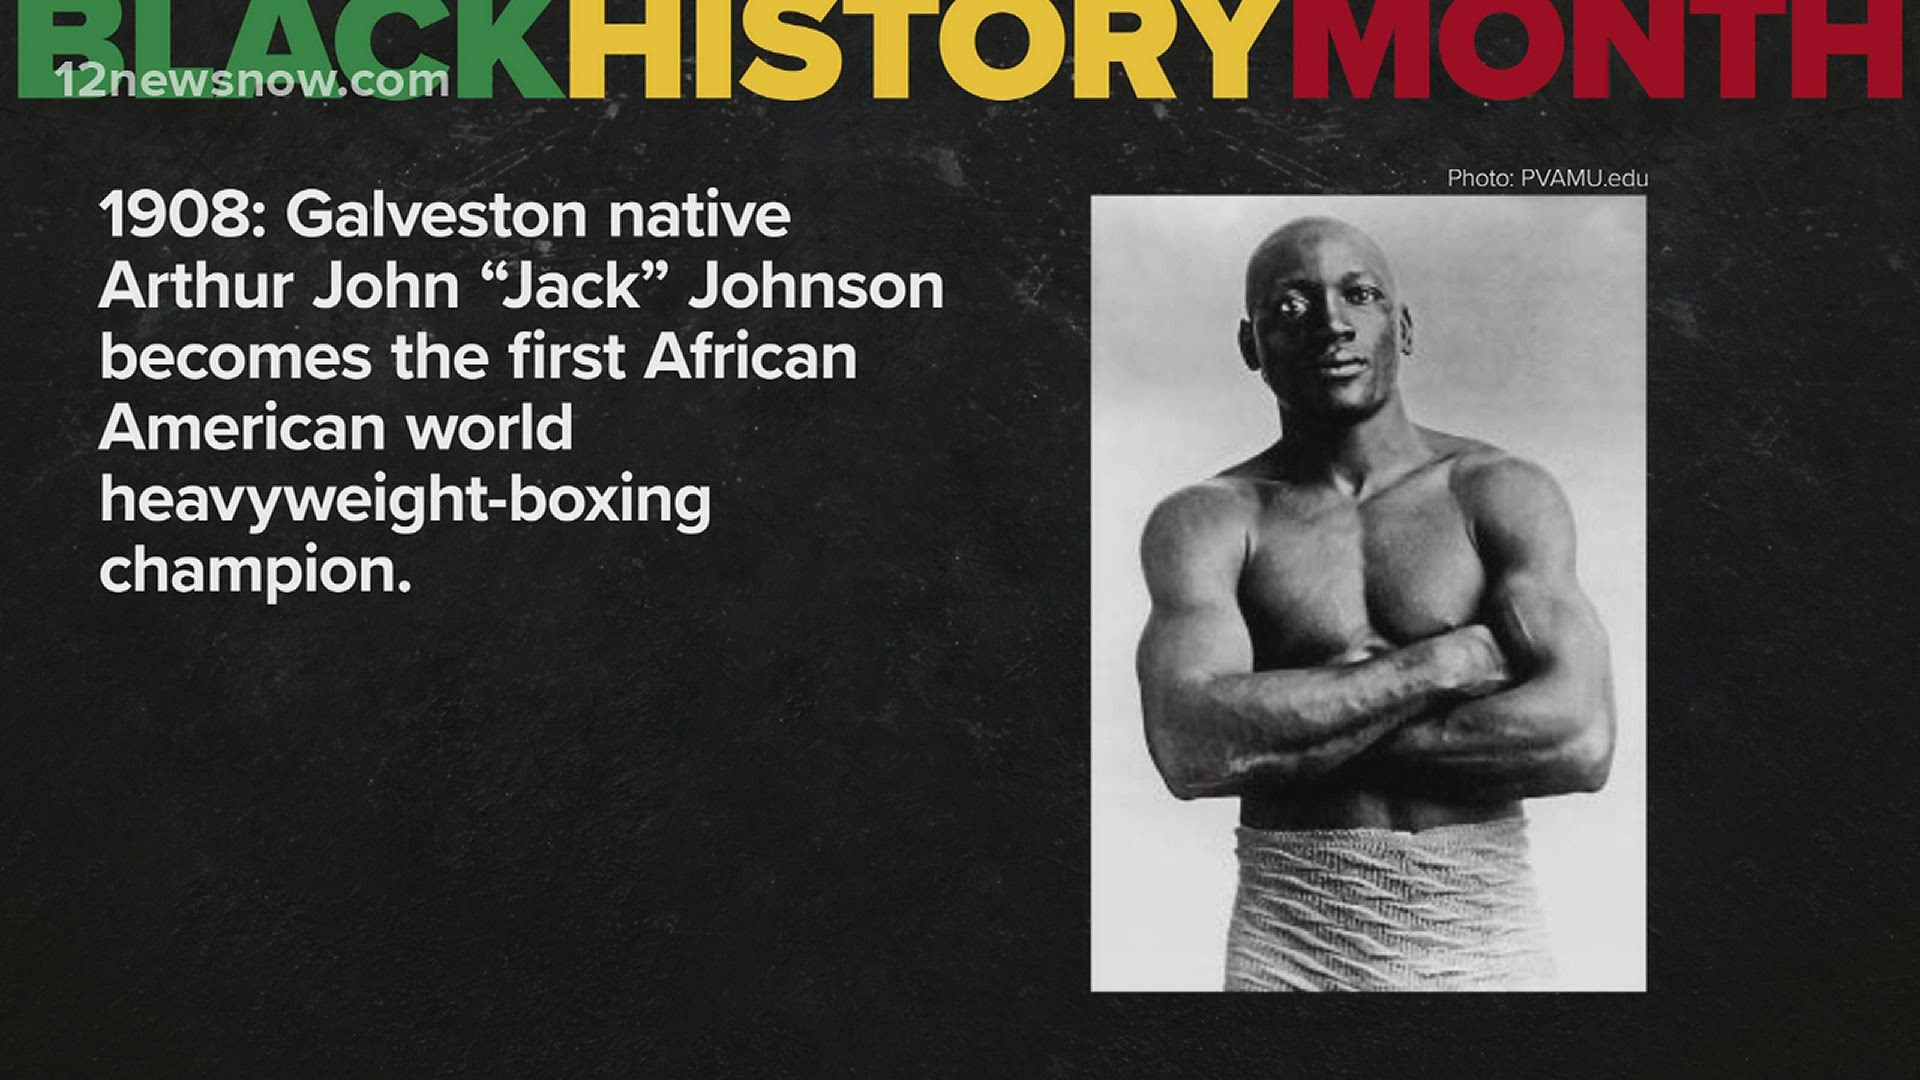 Galveston Native John 'Jack' Johnson became the first African American world heavyweight boxing champion in 1908.